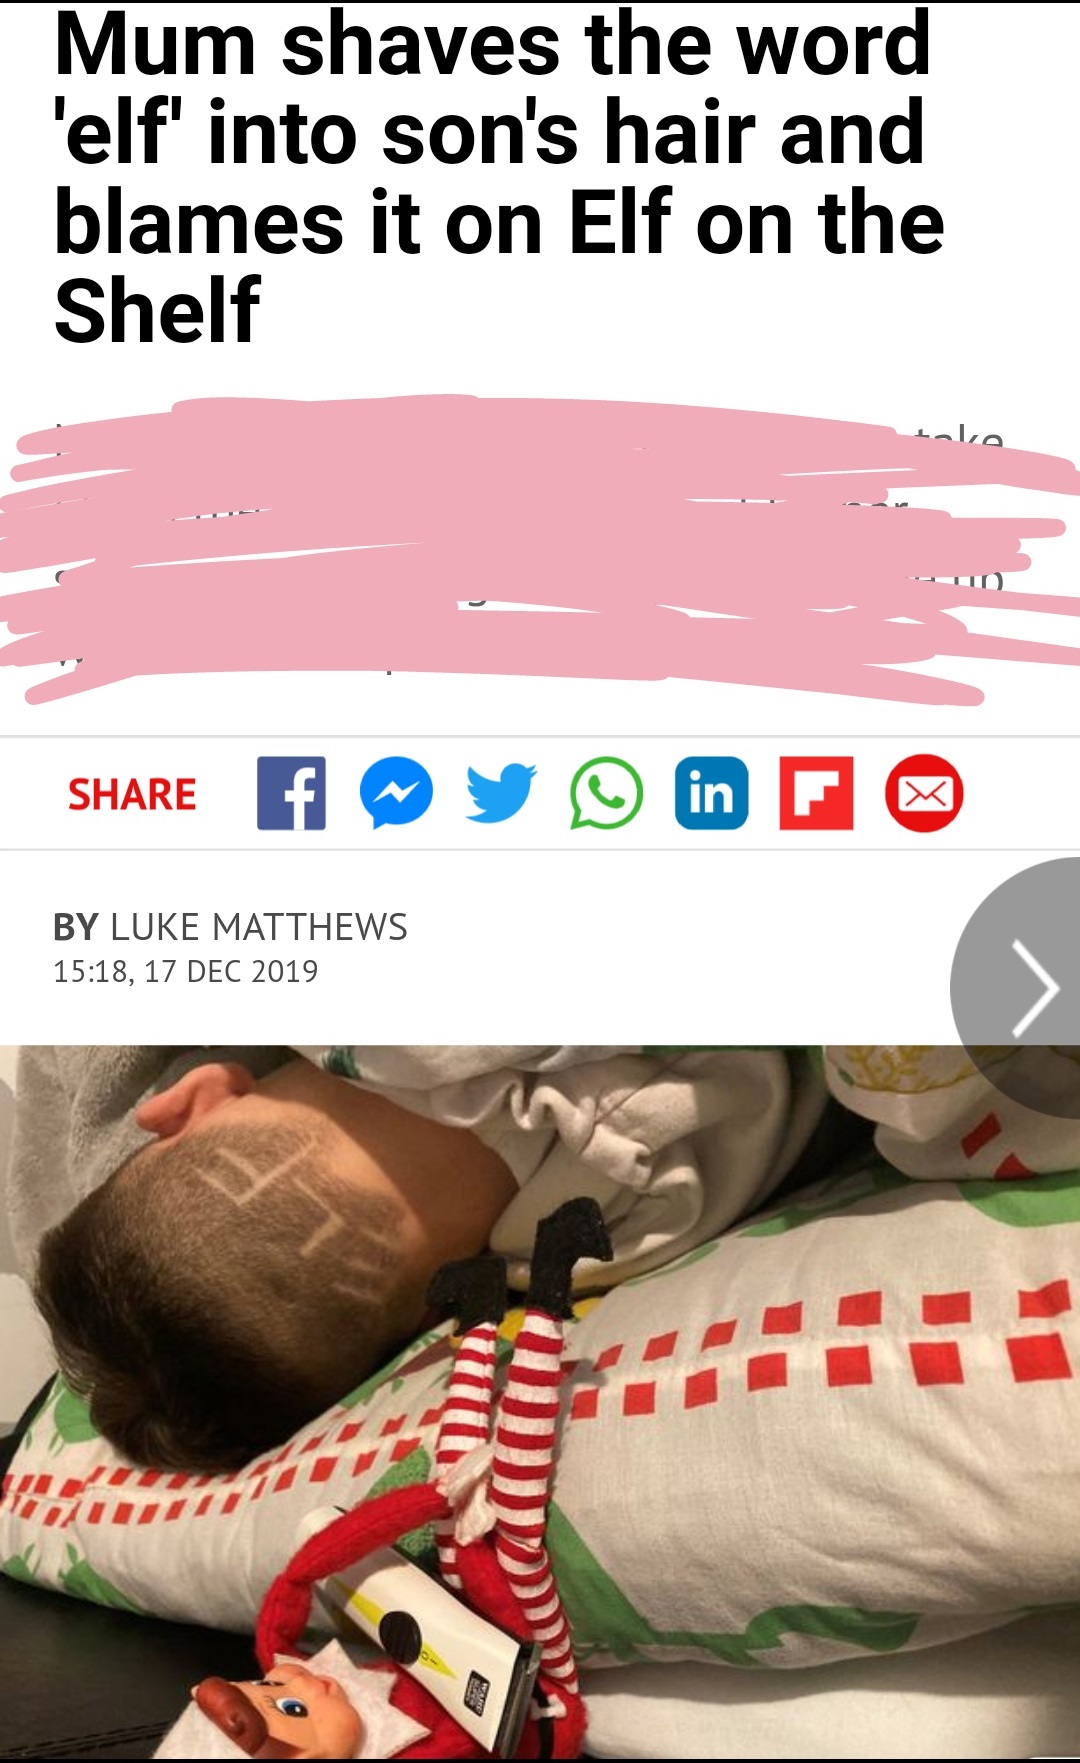 media - Mum shaves the word 'elf' into son's hair and blames it on Elf on the Shelf f y in F By Luke Matthews , Siiii